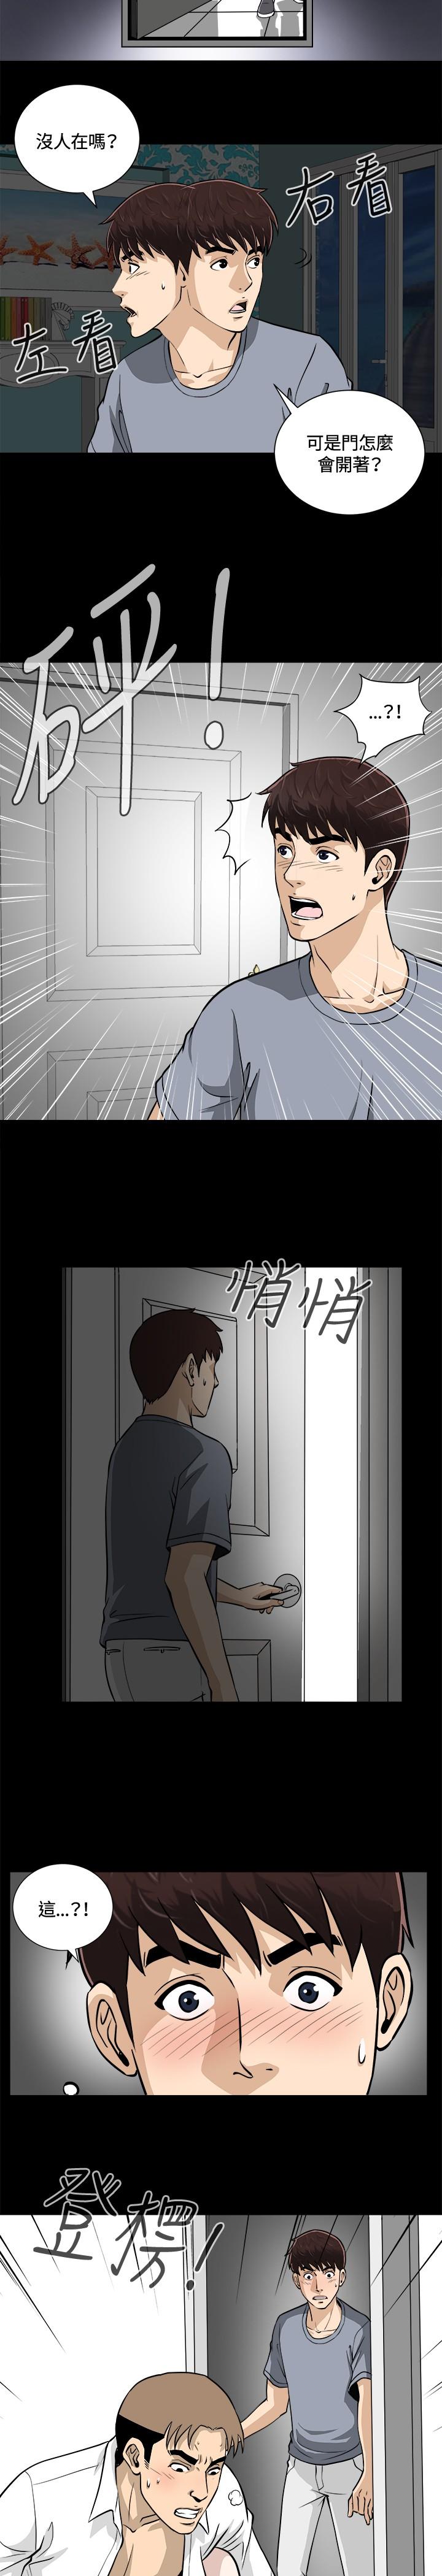 Italiano Dangerous game 危险性游戏 Ch.11 Village - Page 9